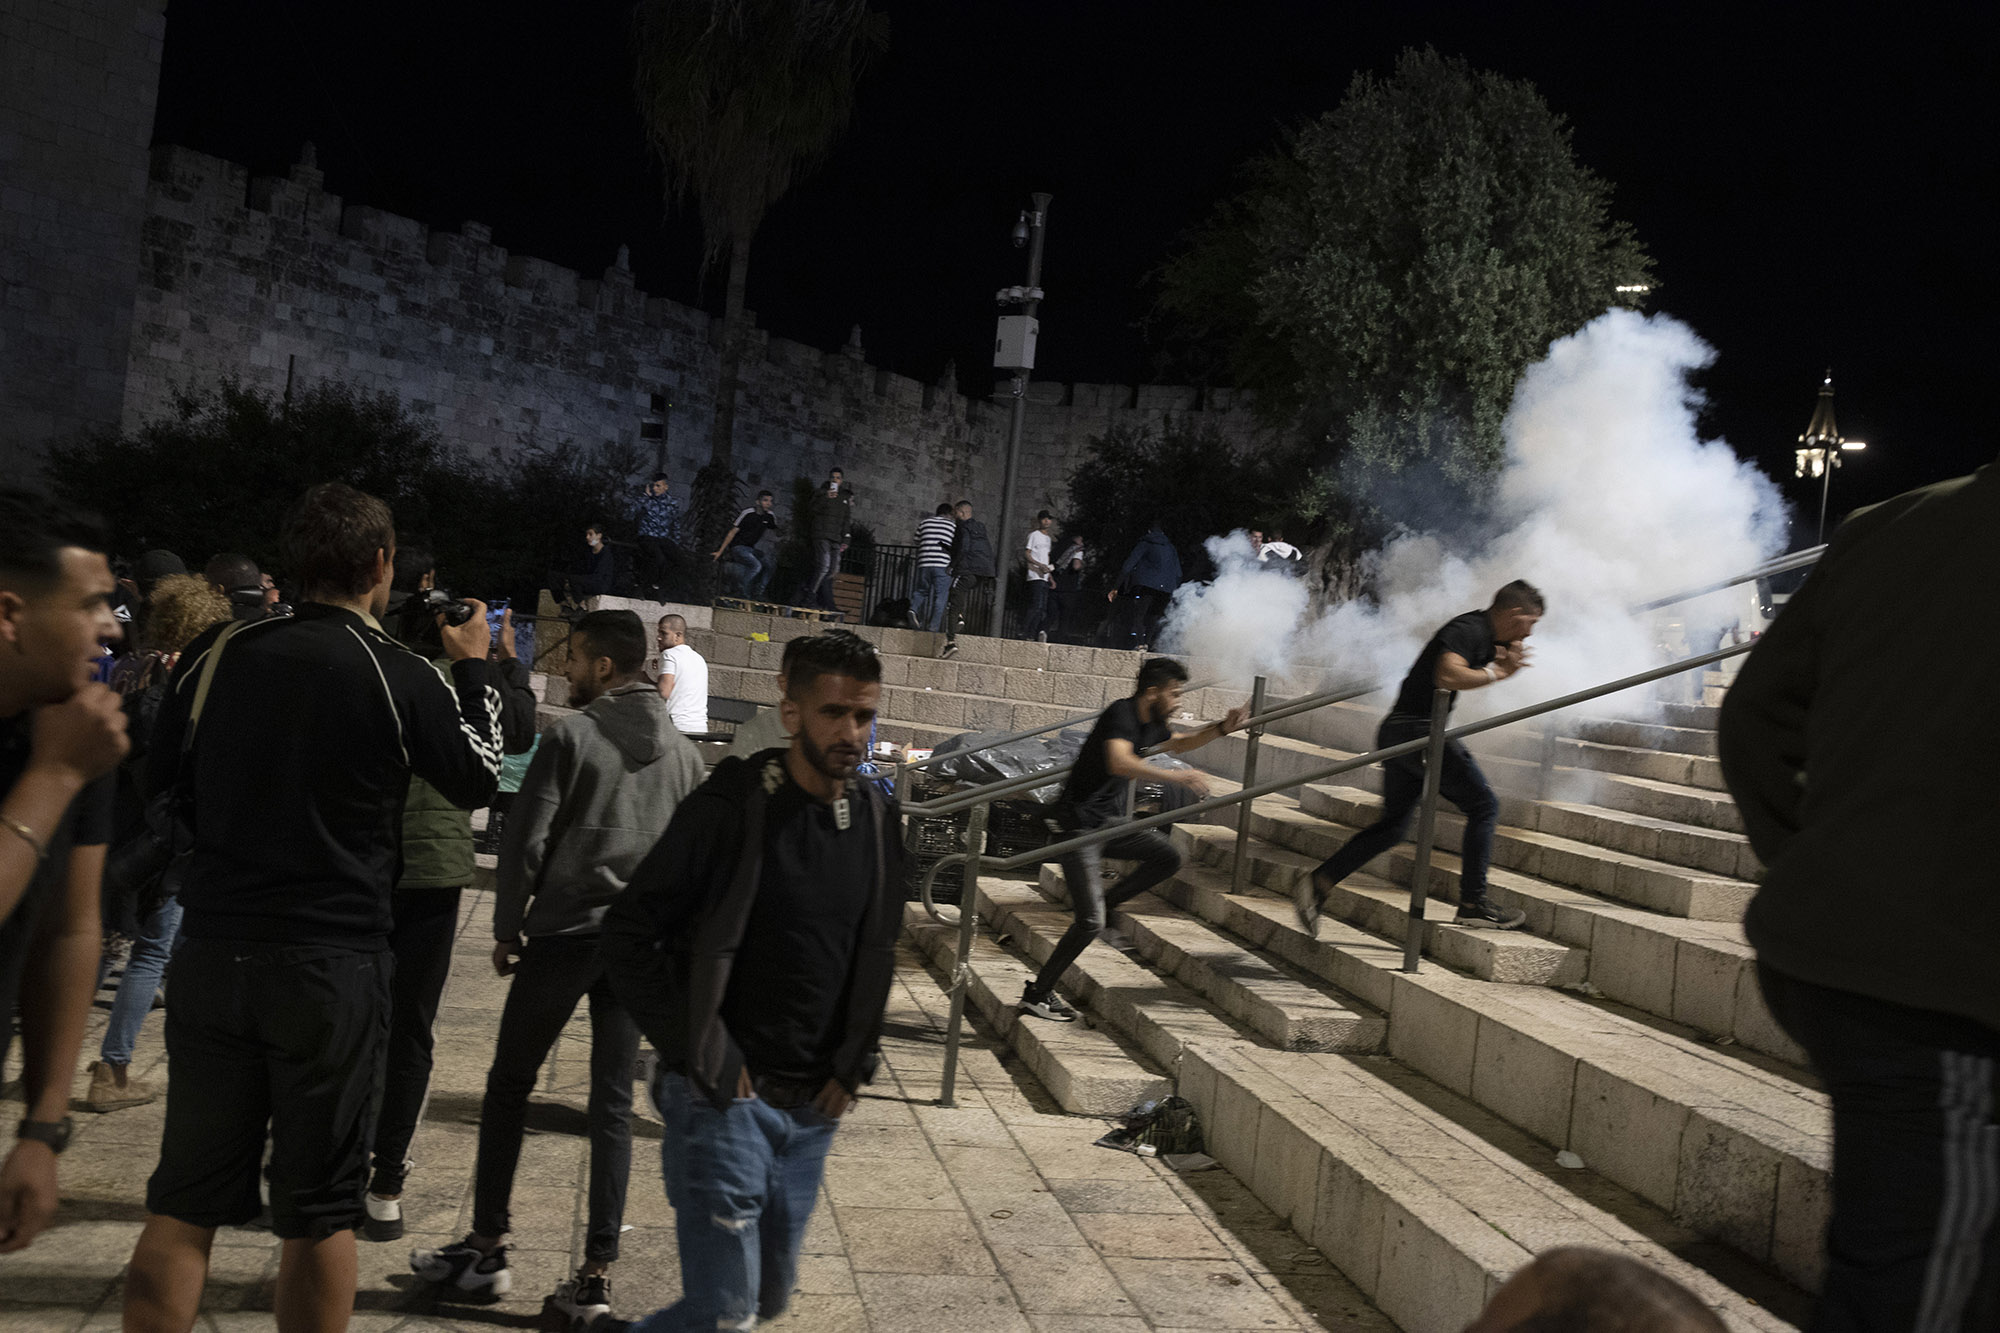 Beefed-up Israel Police Clash With Palestinians in Jerusalem - Bloomberg